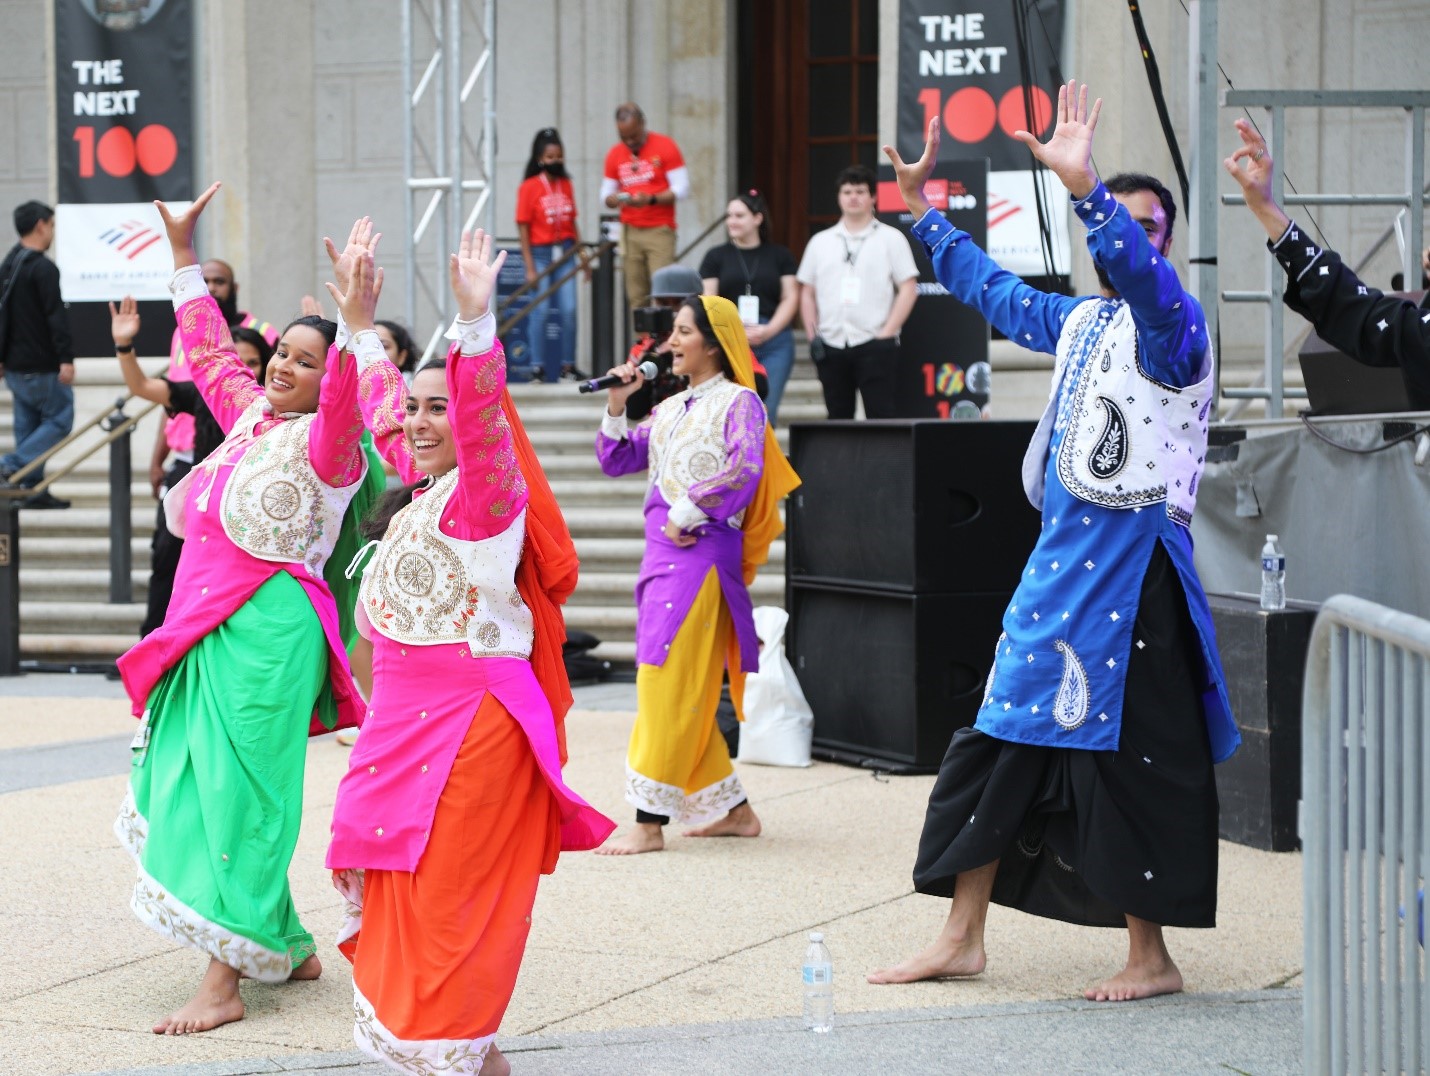 Picture of people outside in front of marble steps, wearing layers of colorful clothes dancing with their arms up